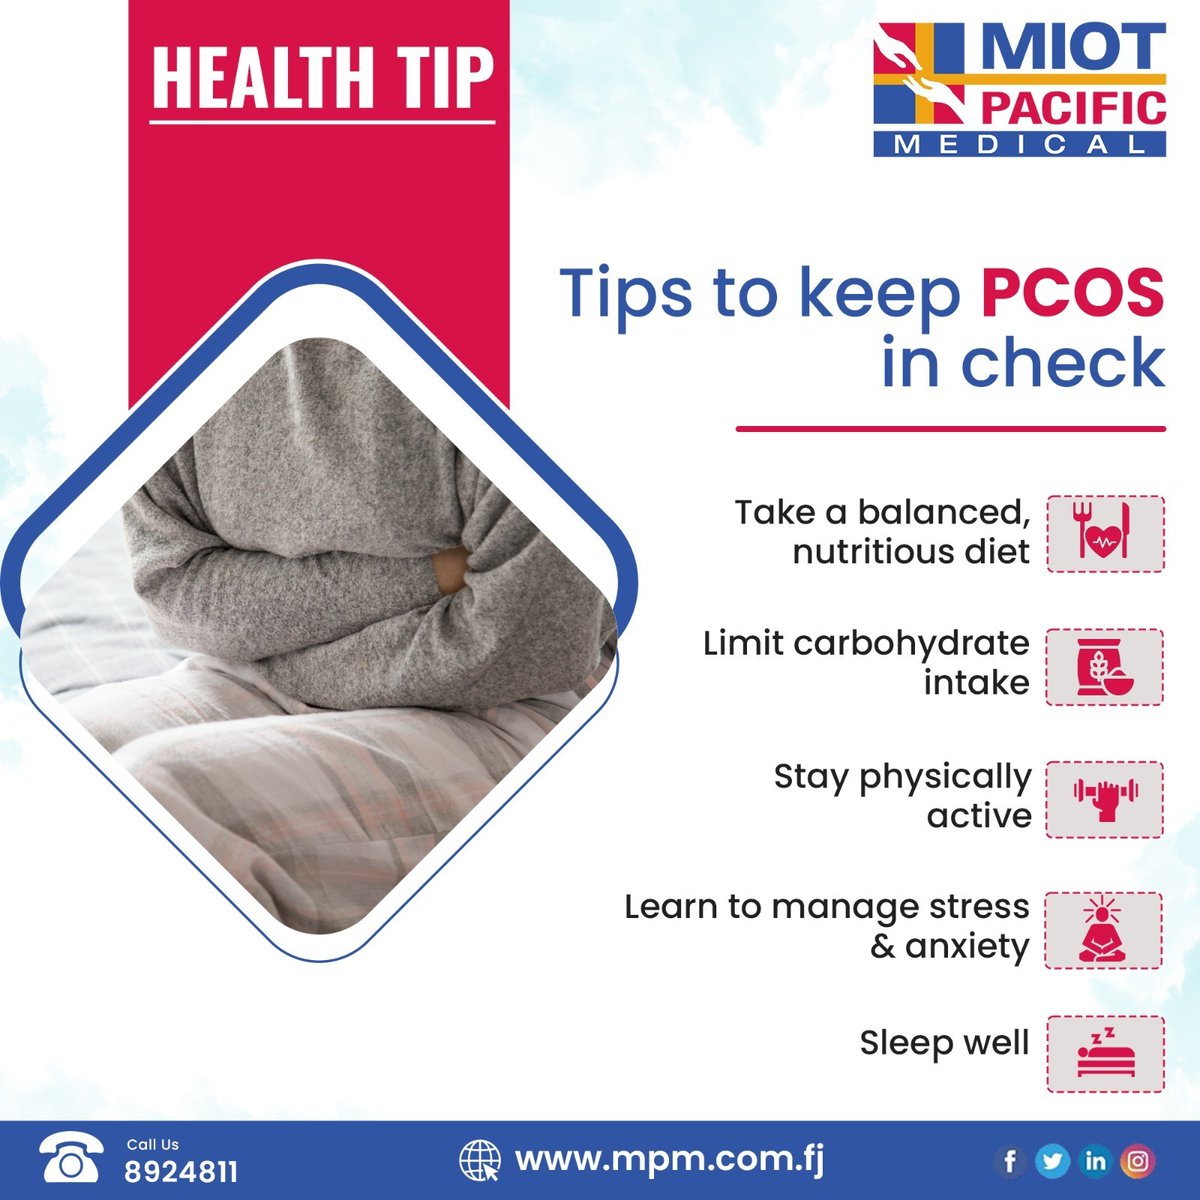 Women with PCOS may be at higher risk for type 2 diabetes, high blood pressure, heart problems, and endometrial cancer. 
So, it is important to keep PCOS in check and visit the doctor regularly

#Healthtip #Health #Healthtipoftheday #wellness #PCOS #diabetes #MIOTPacificMedical